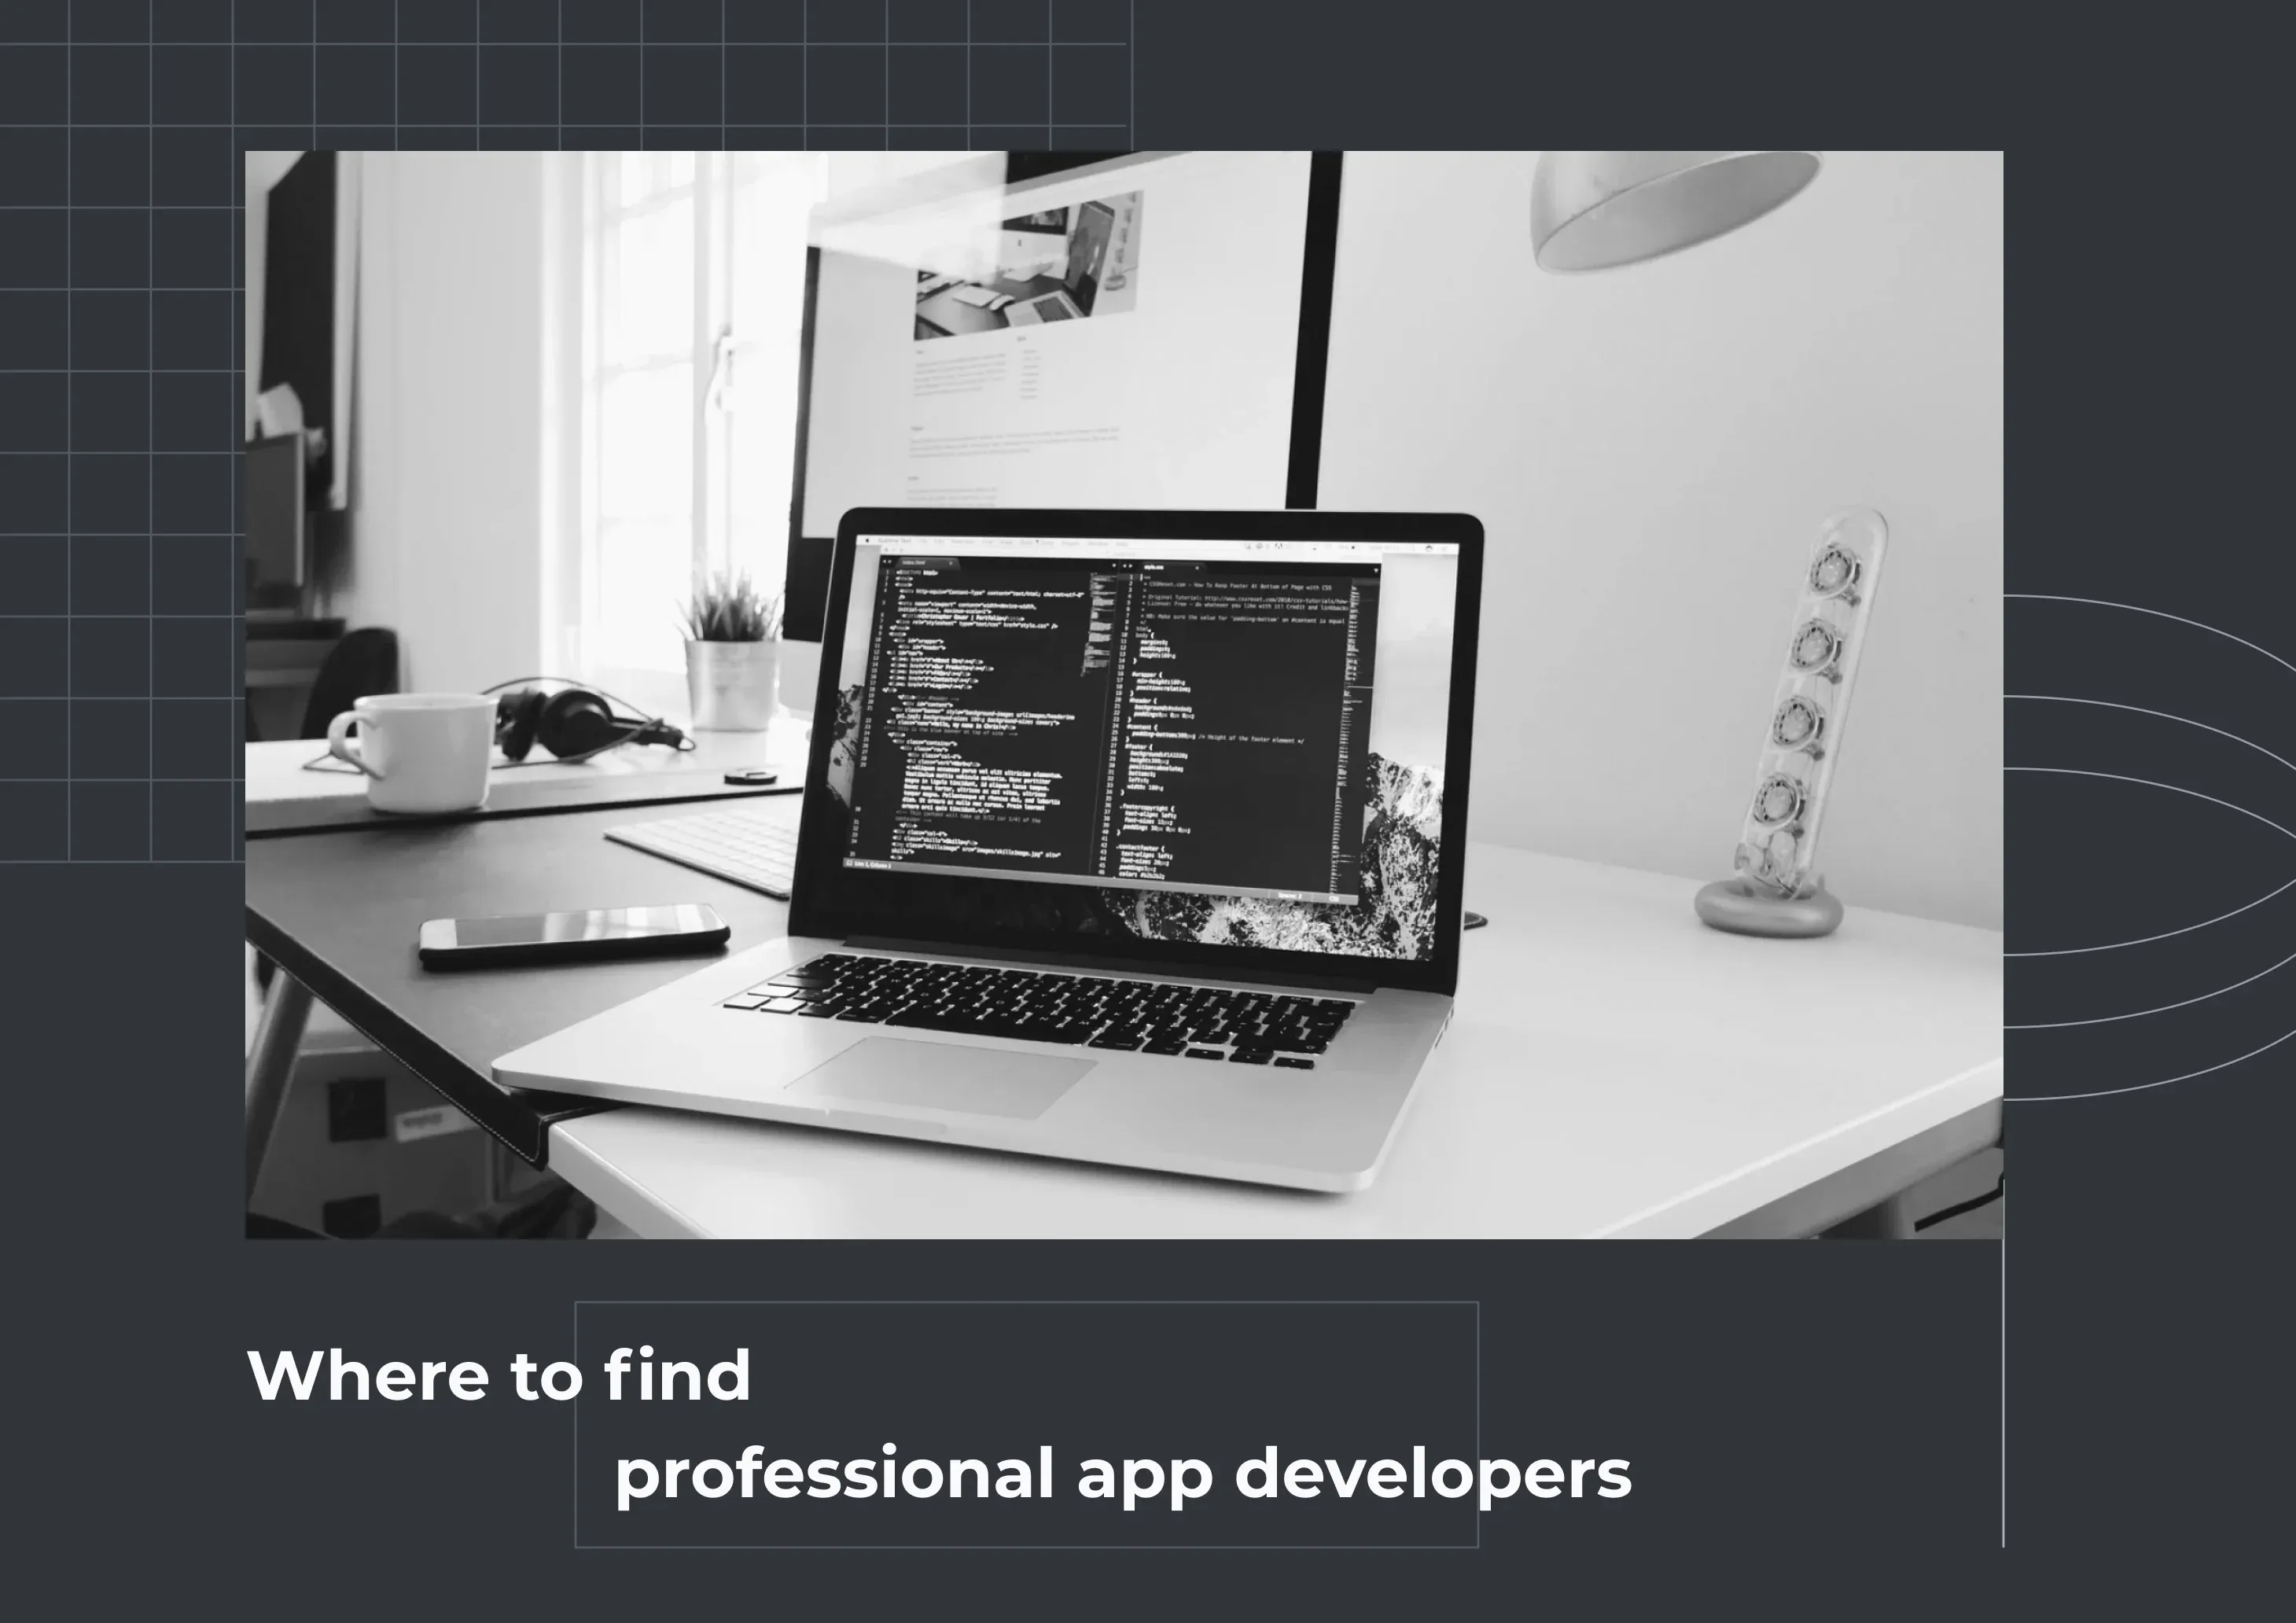 Where to find professional app developers